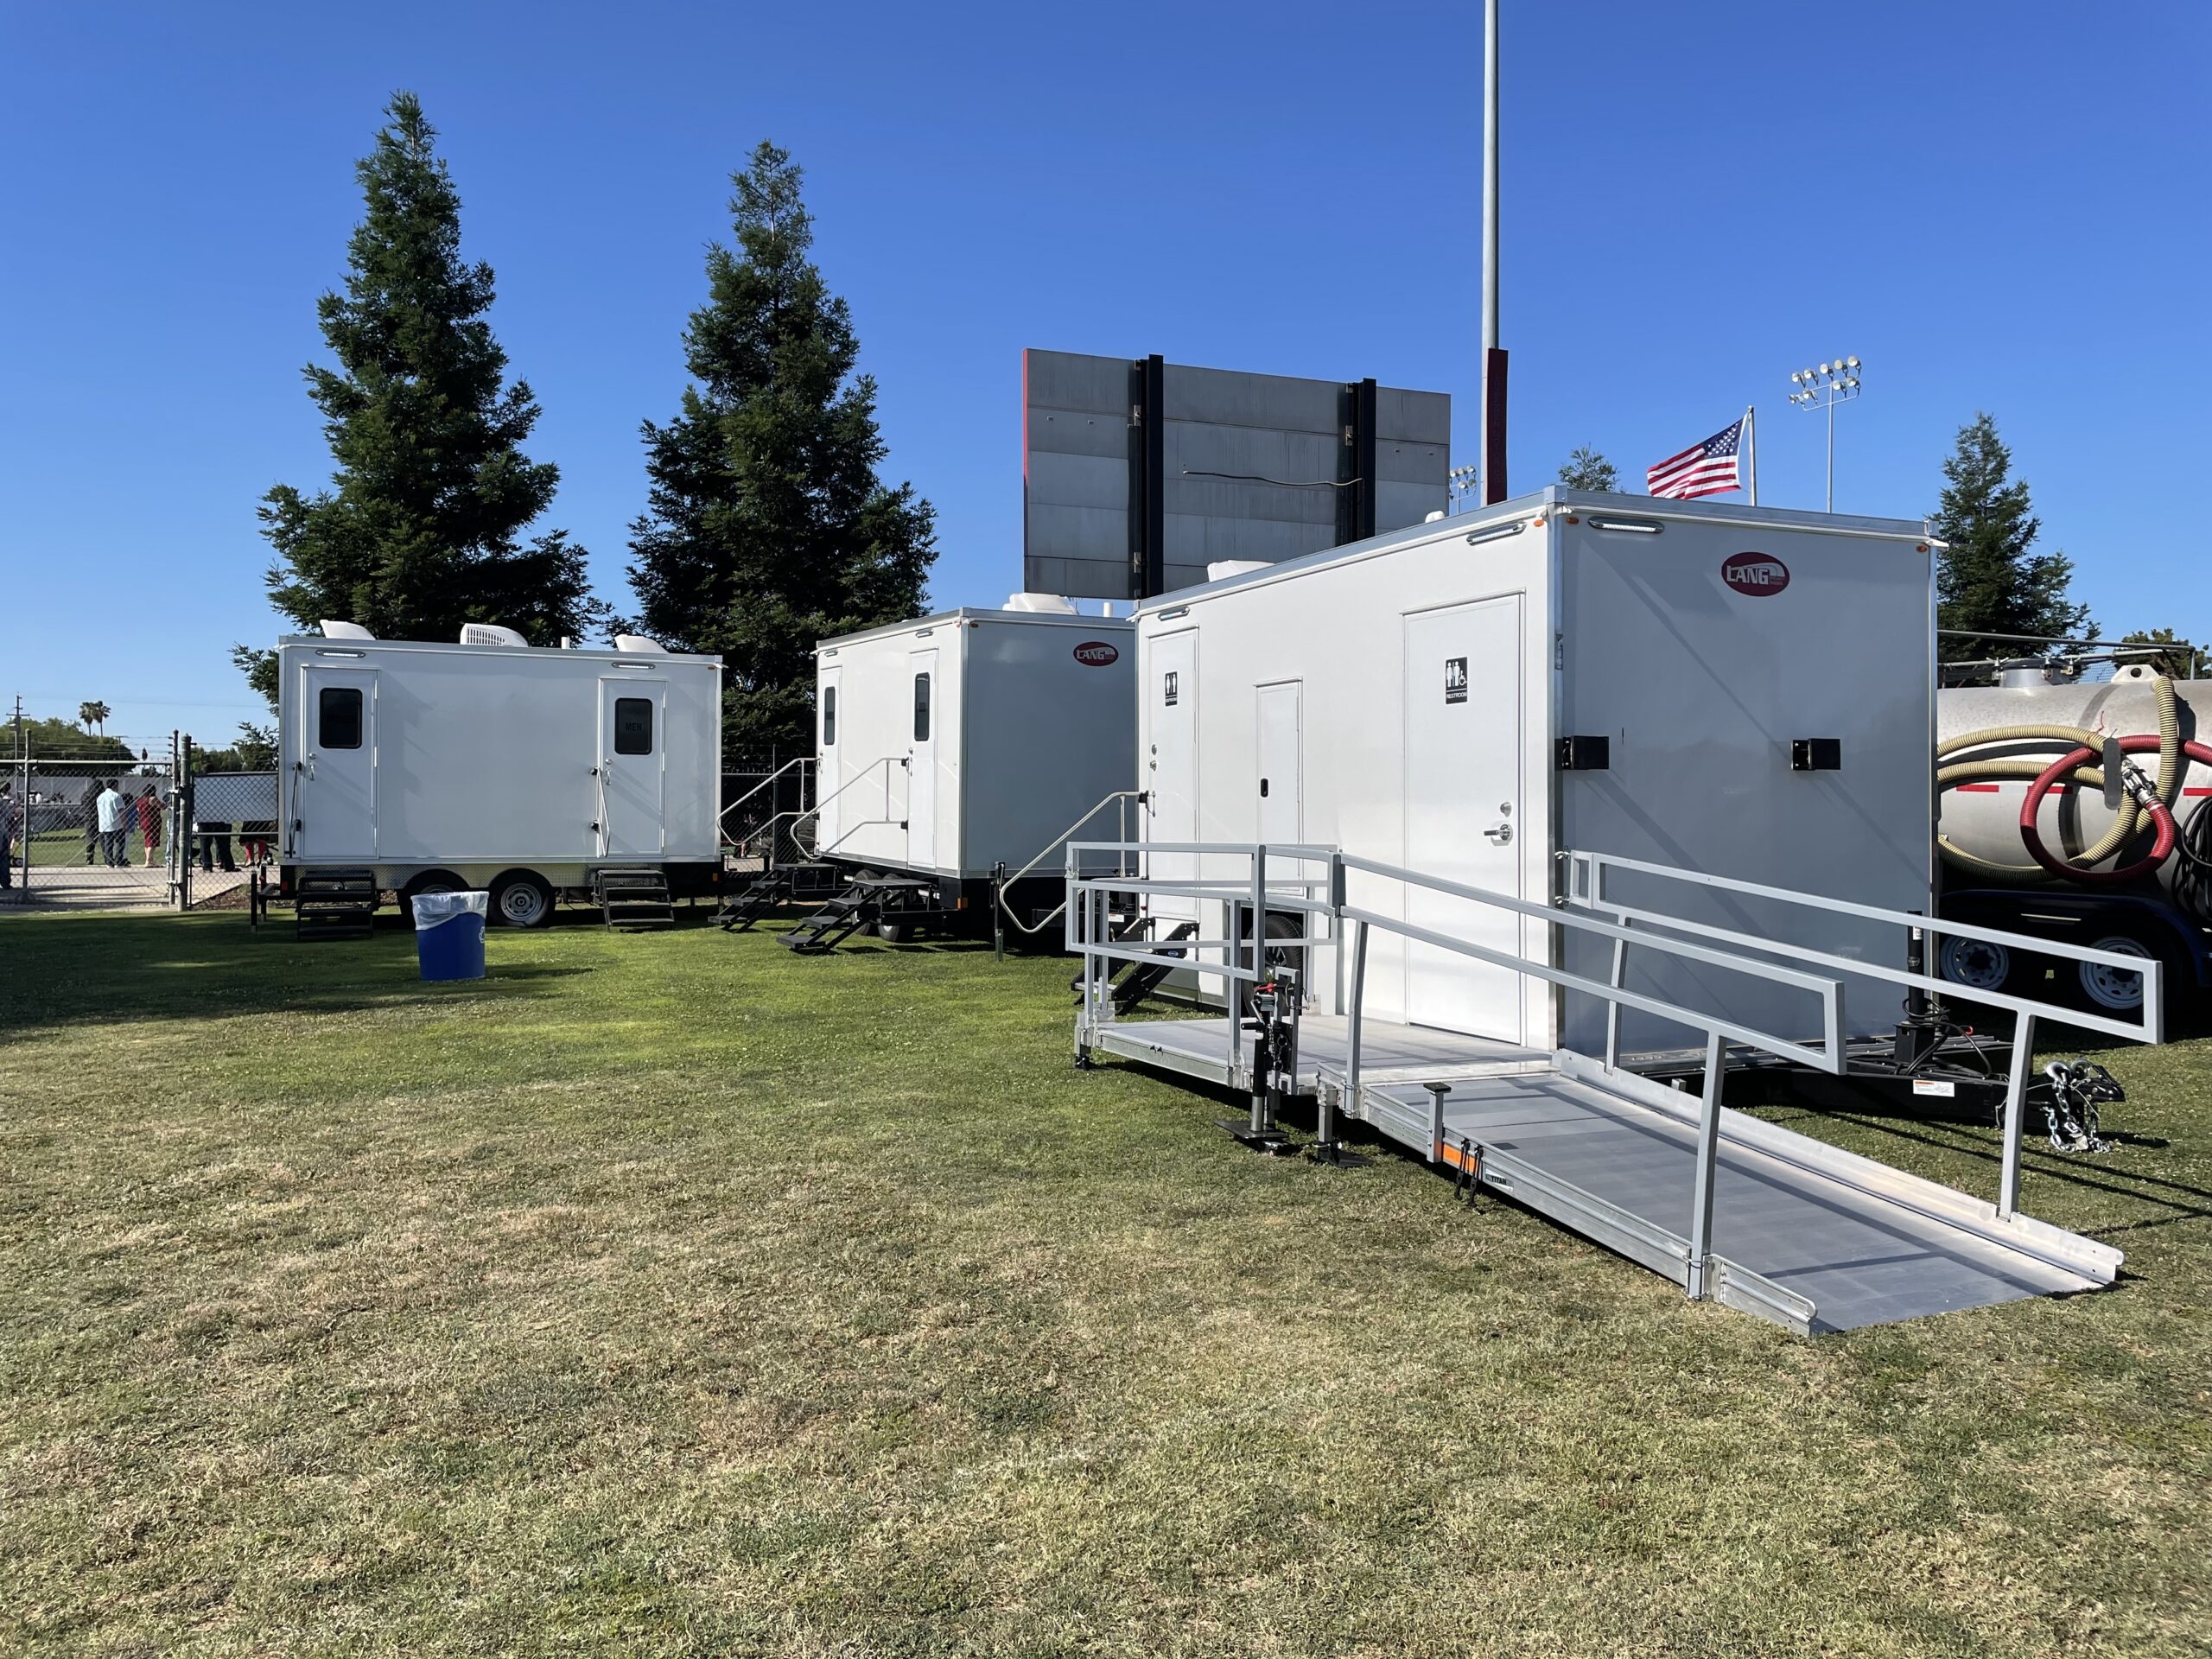 ADA Restroom and Other Trailers